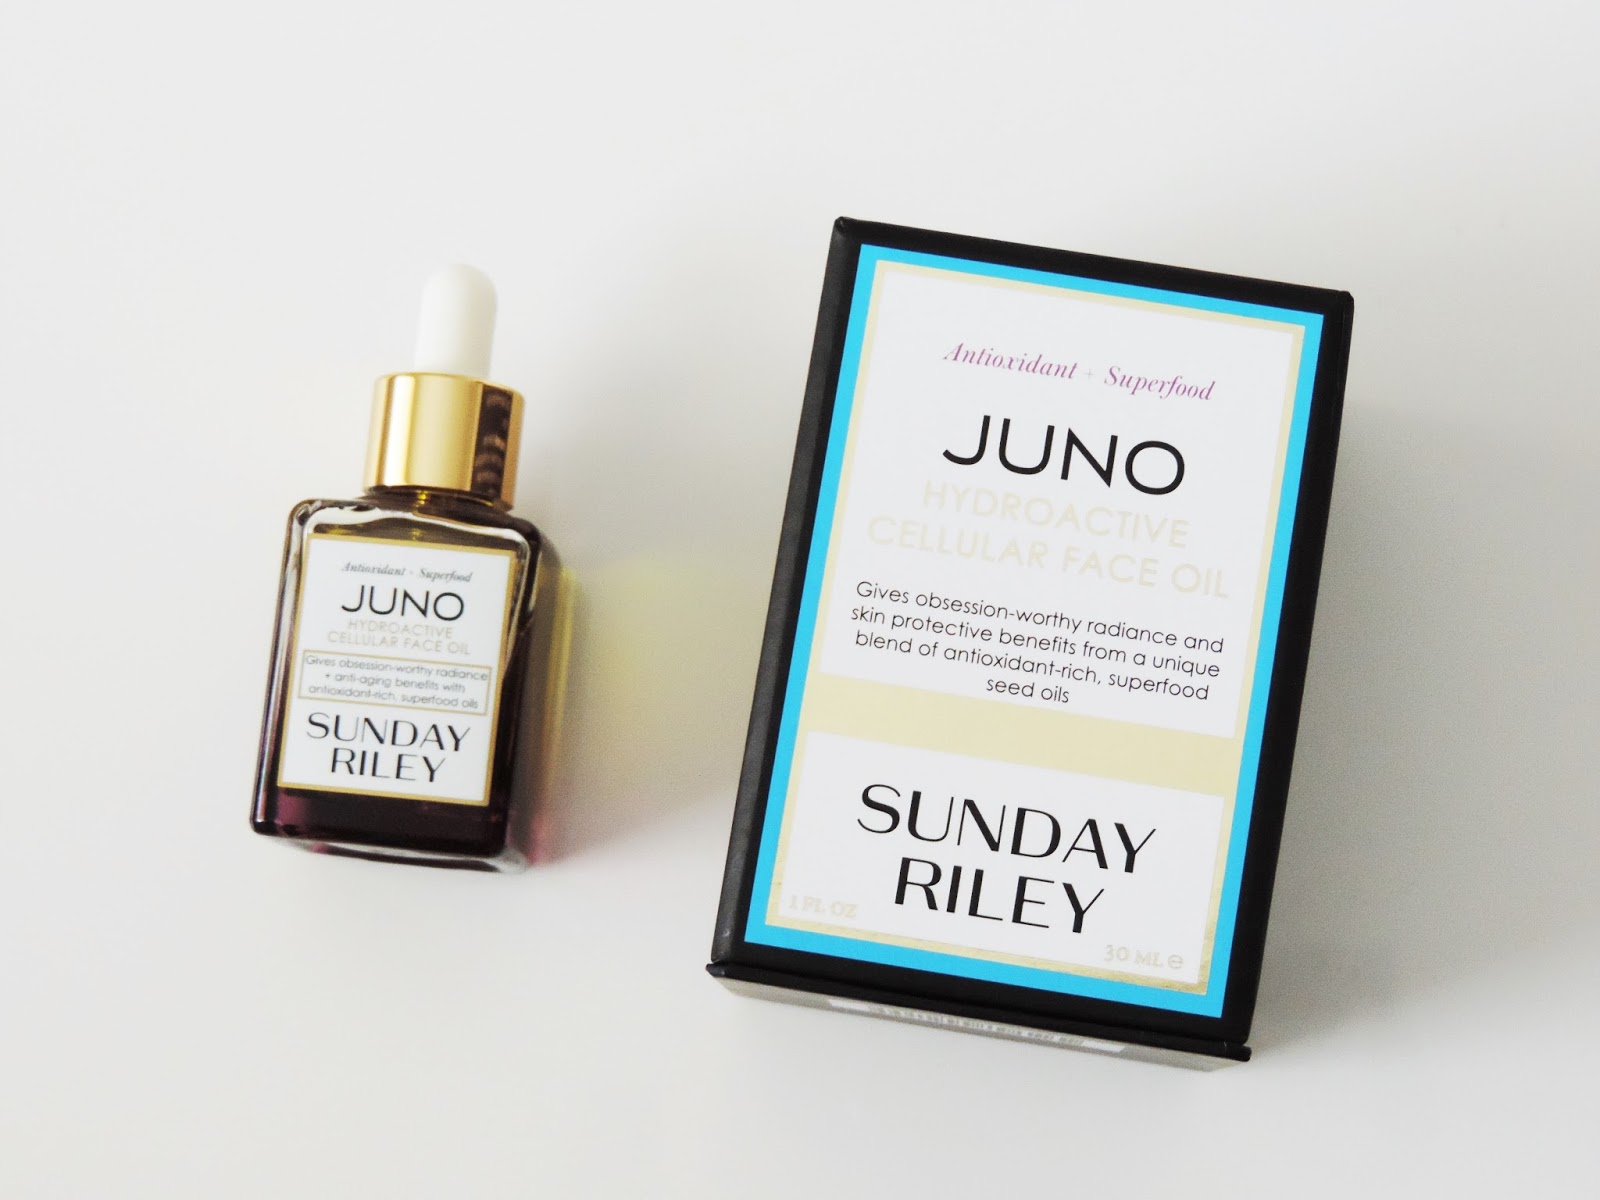 Leona's Looks: Sunday Riley Juno Hydroactive Cellular Face Oil Review